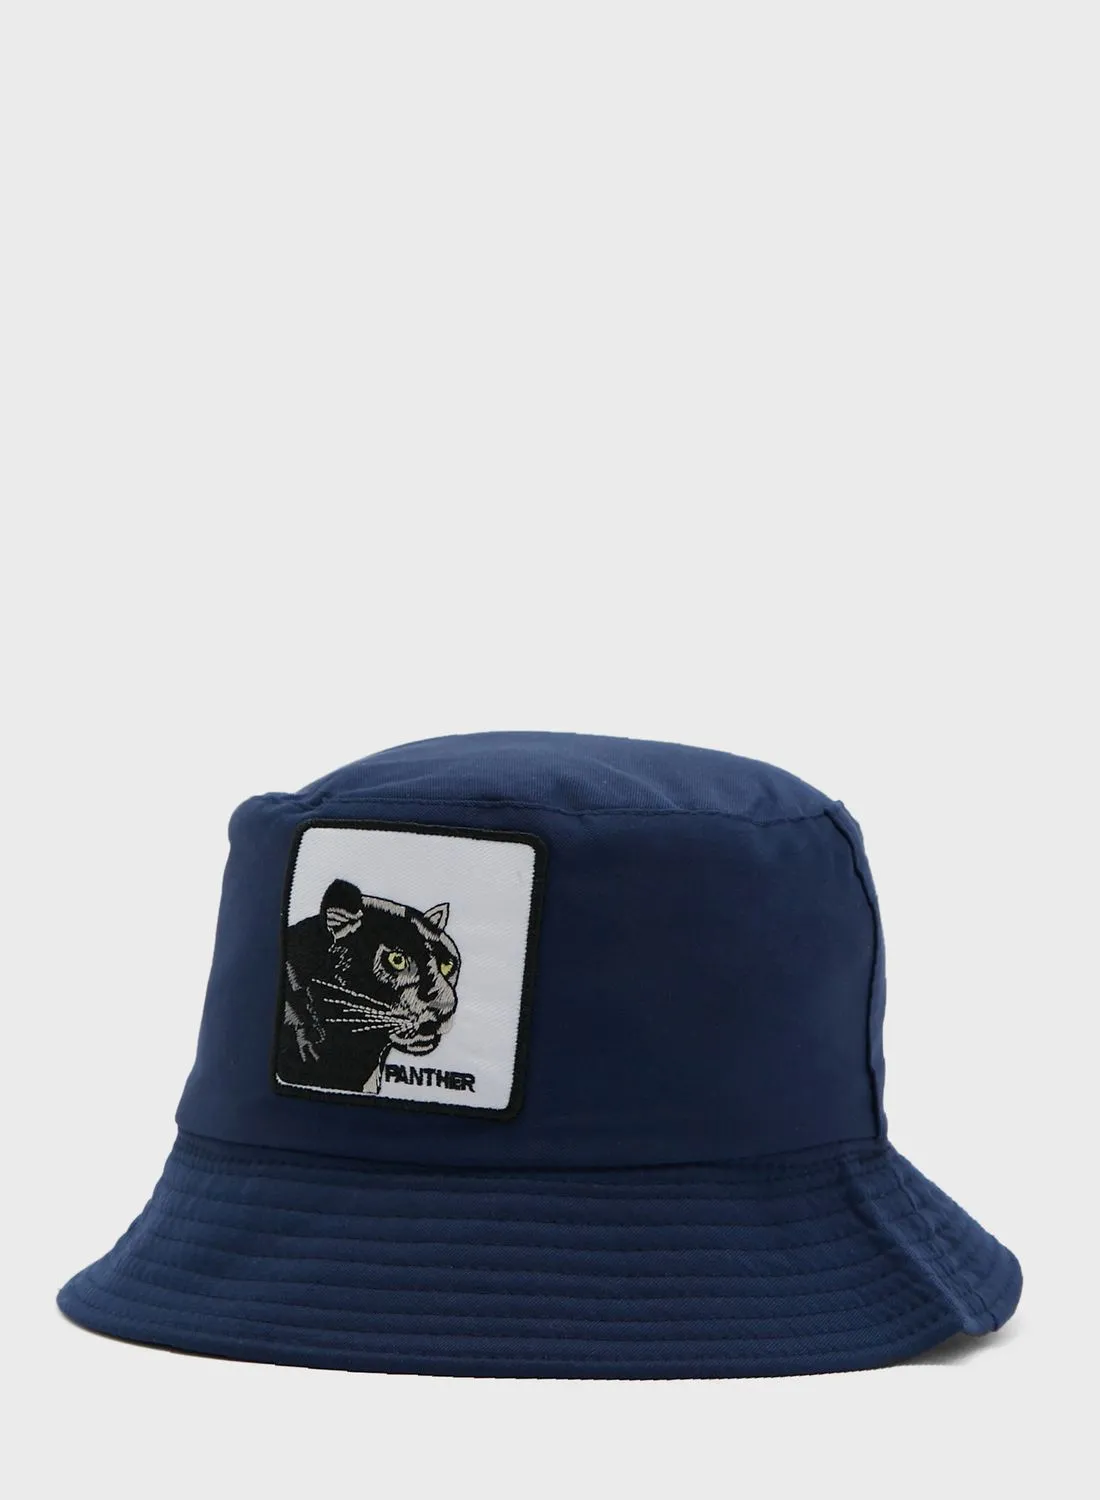 Seventy Five Panther Bucket Hat